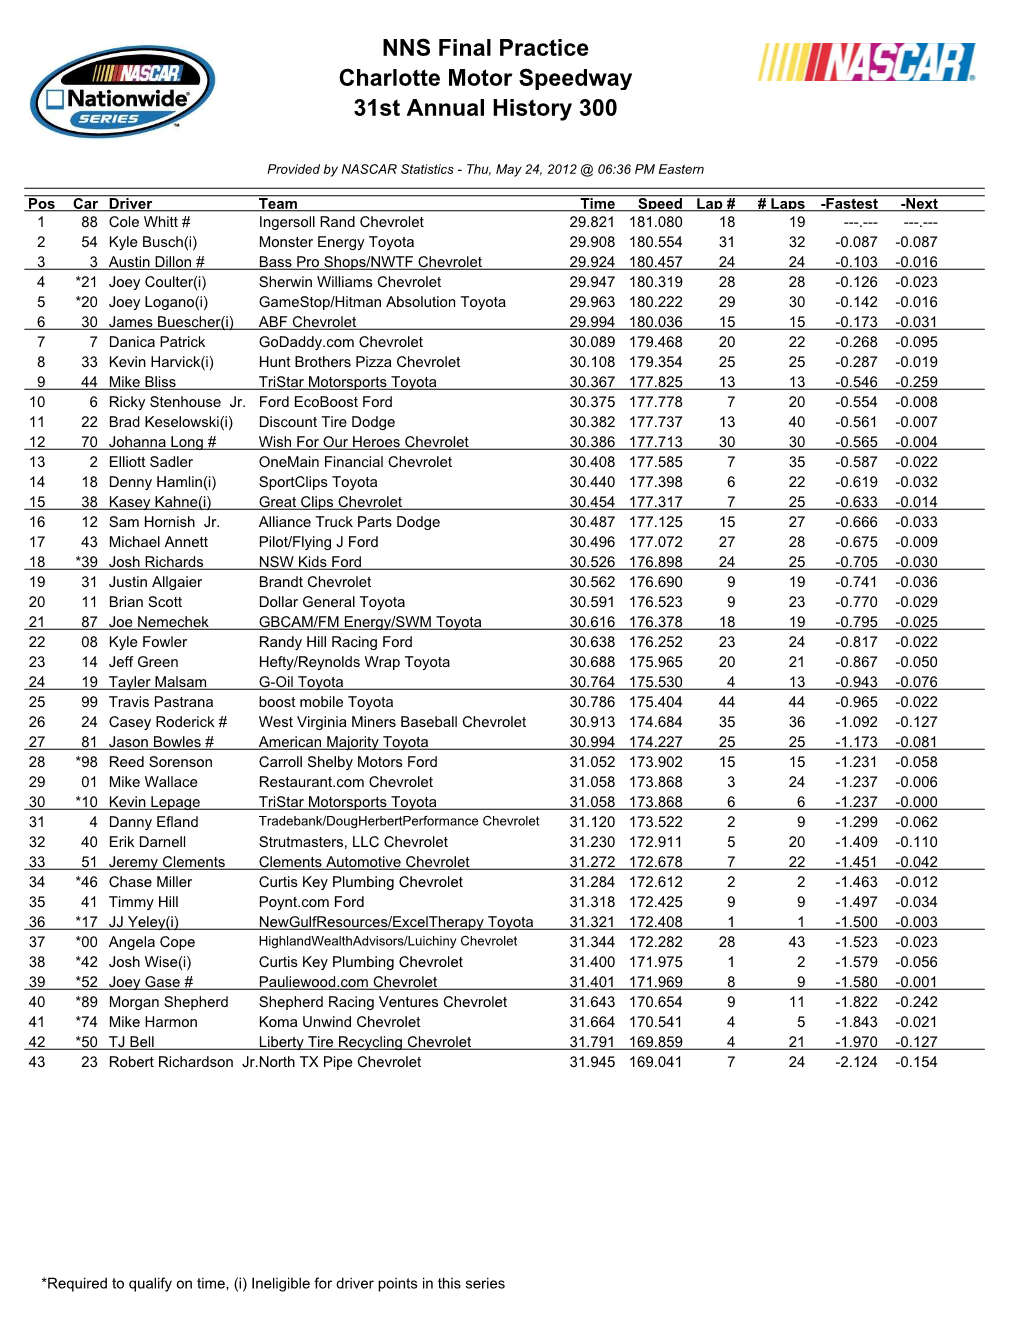 NNS Final Practice Charlotte Motor Speedway 31St Annual History 300